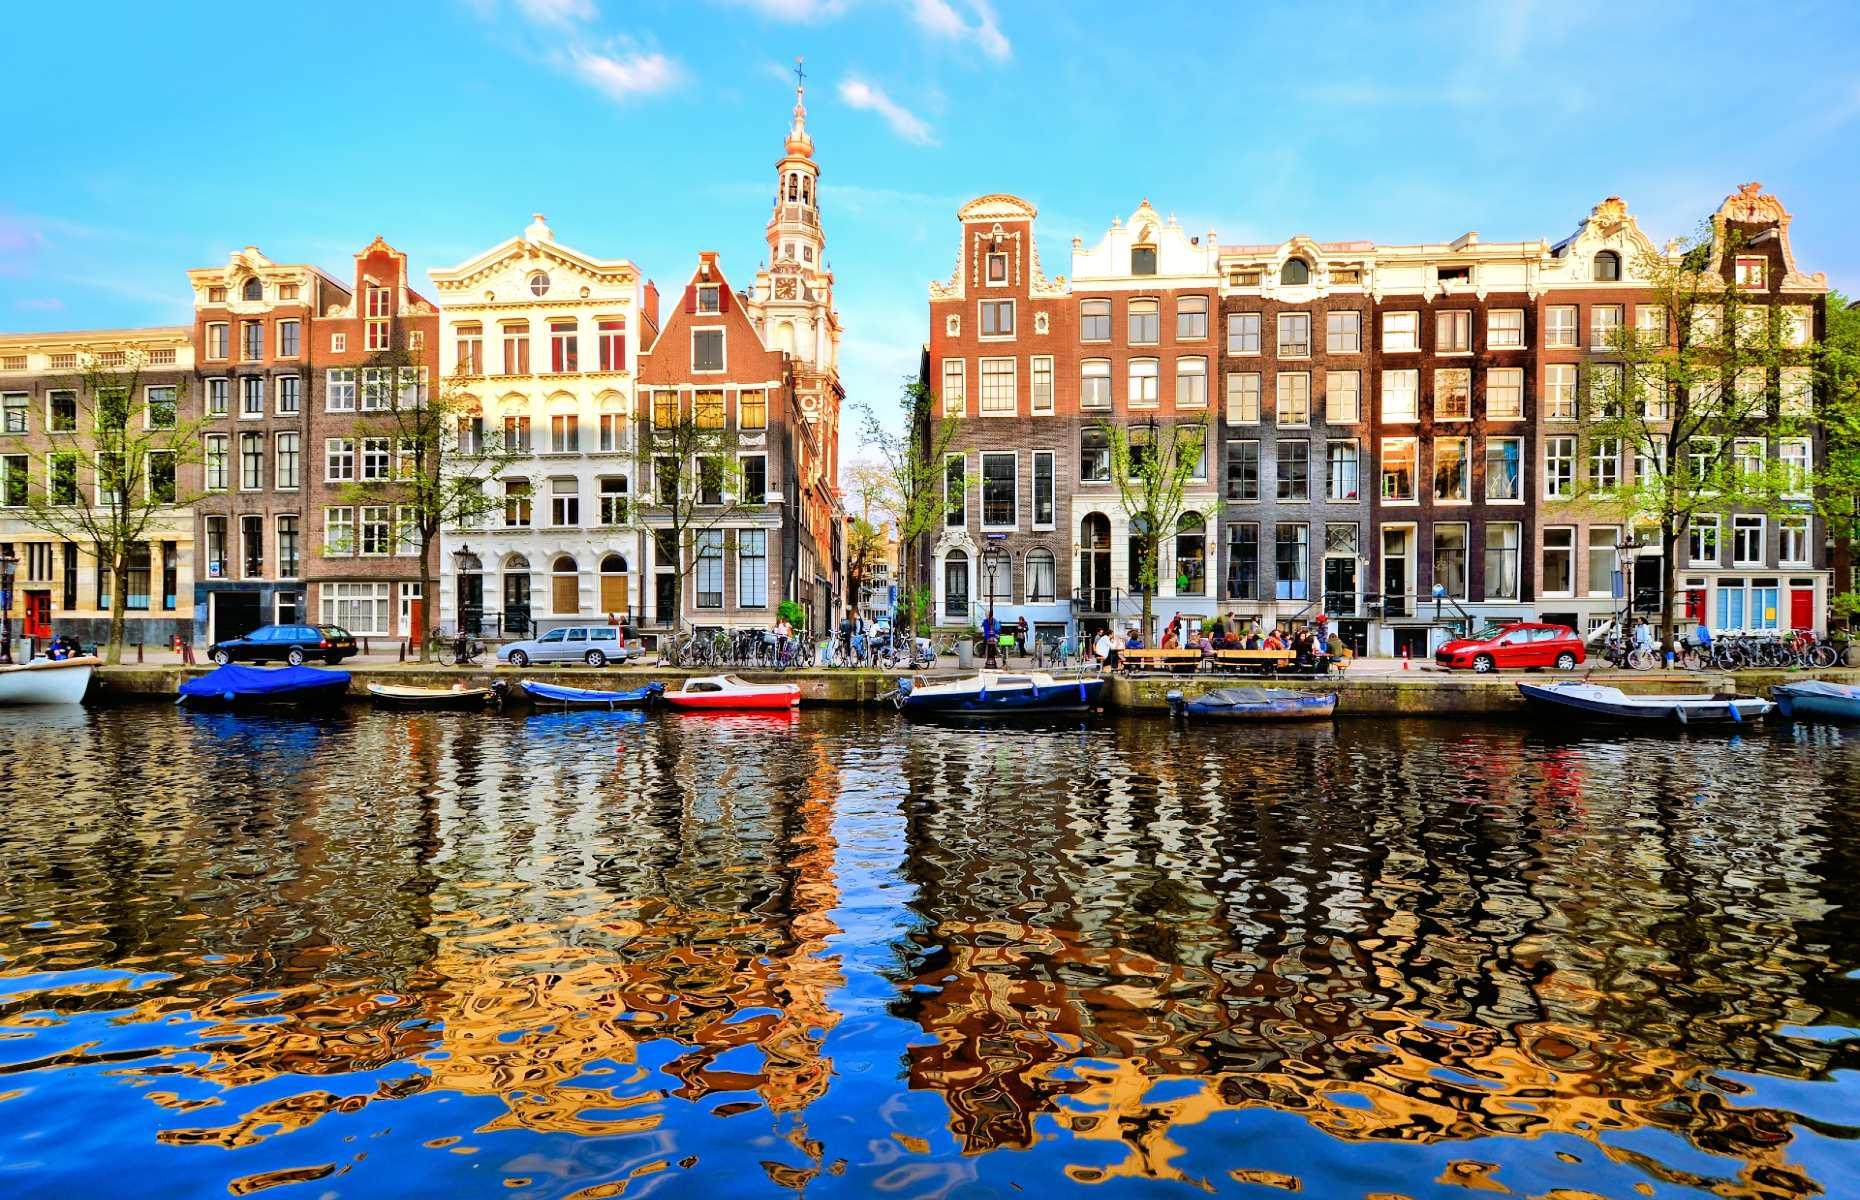 <p>Visitors love Amsterdam’s gorgeous canals and historic architecture – but the crowds that have inundated the Dutch capital in recent years are becoming unsustainable. That’s why, in November 2022, officials announced a new plan to keep the city liveable. Measures include limits on the number of river cruises, earlier closing times for venues in the Red Light District, measures to tackle rowdy groups and a tightening of policies on vacation rentals and B&Bs.</p>